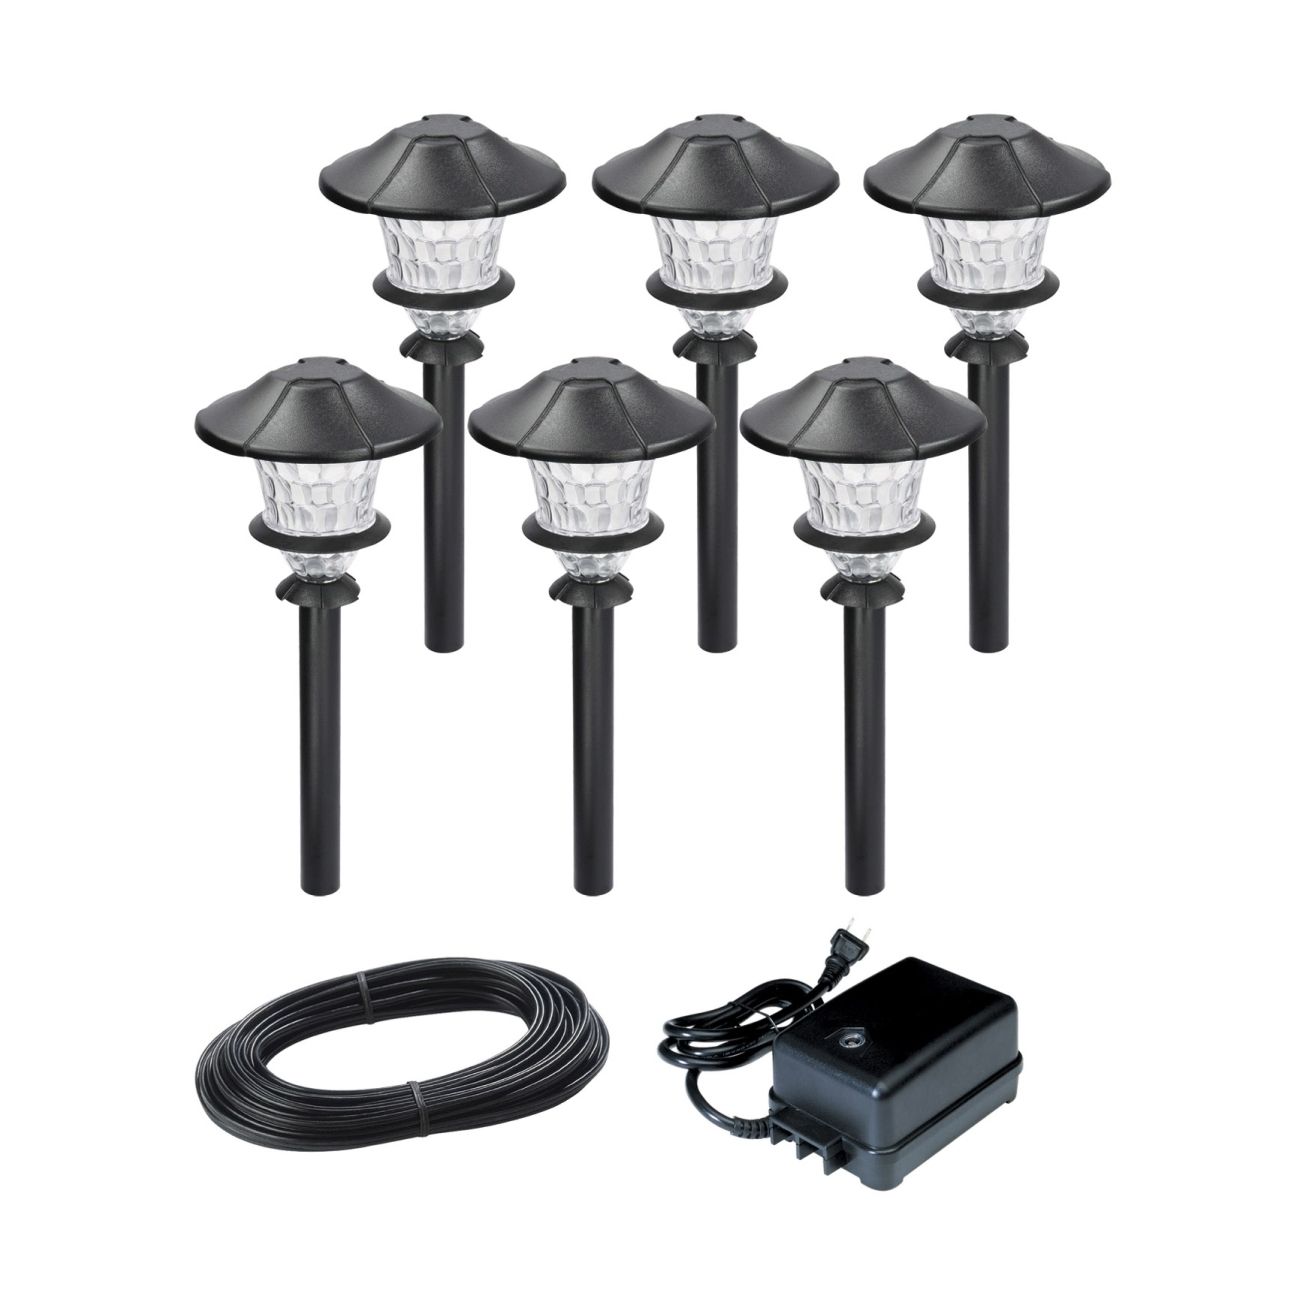 Electric Outdoor Lighting Garden – Lawsonreport #b8204f584123 Throughout Best And Newest Electric Outdoor Lighting Garden (View 6 of 20)